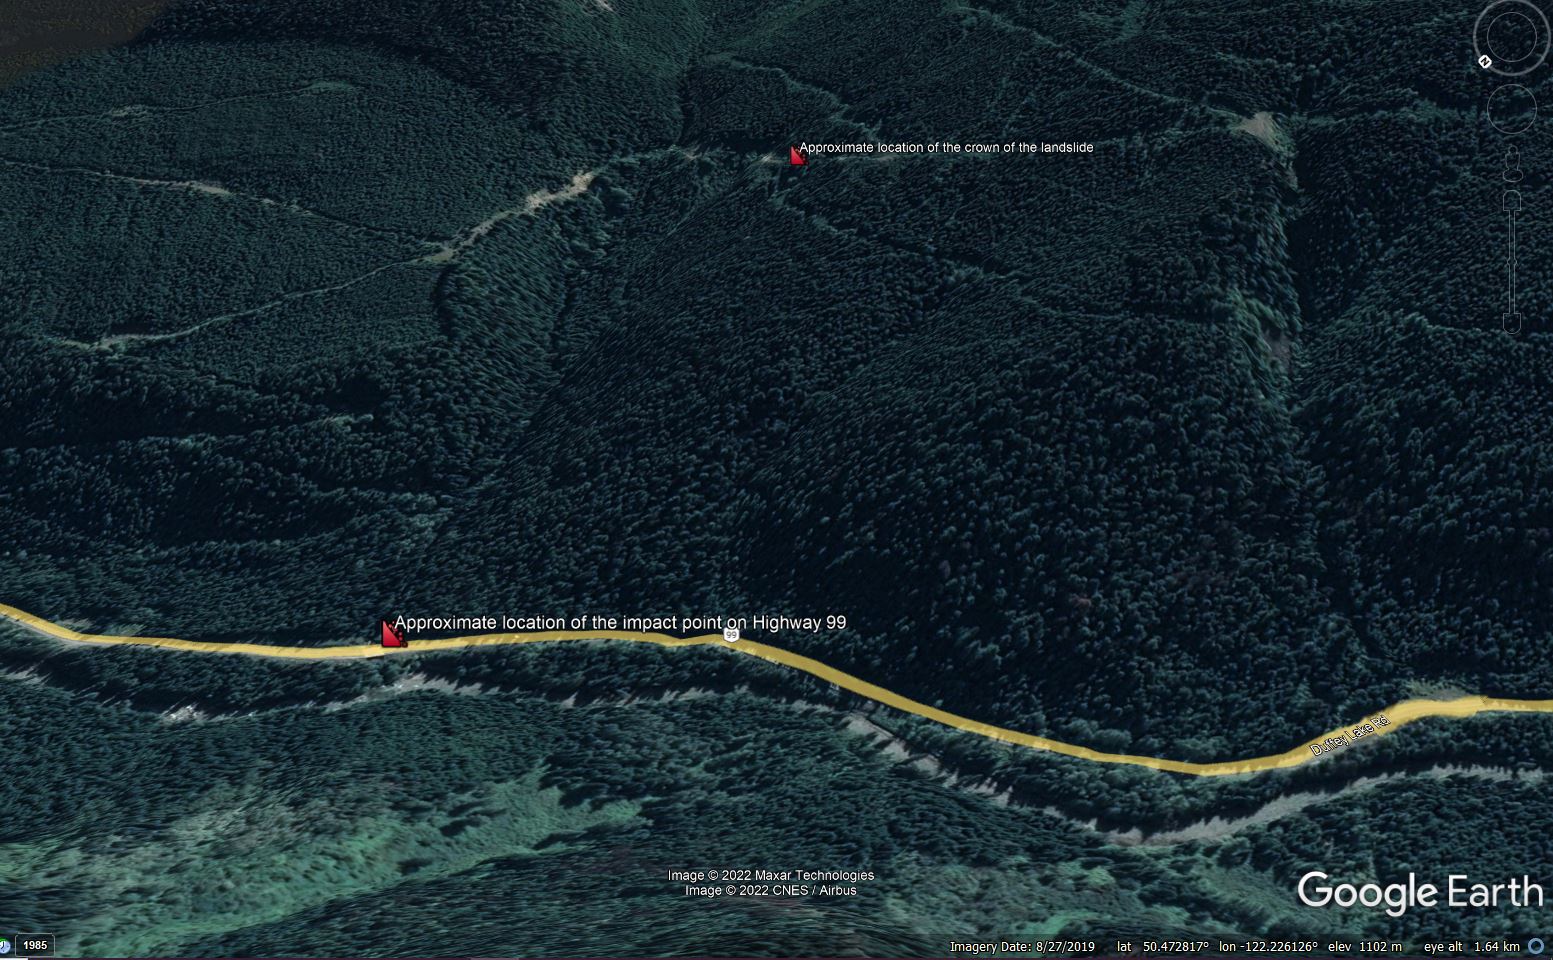 Google Earth image showing the approximate location of the Duffey Lake landslide.